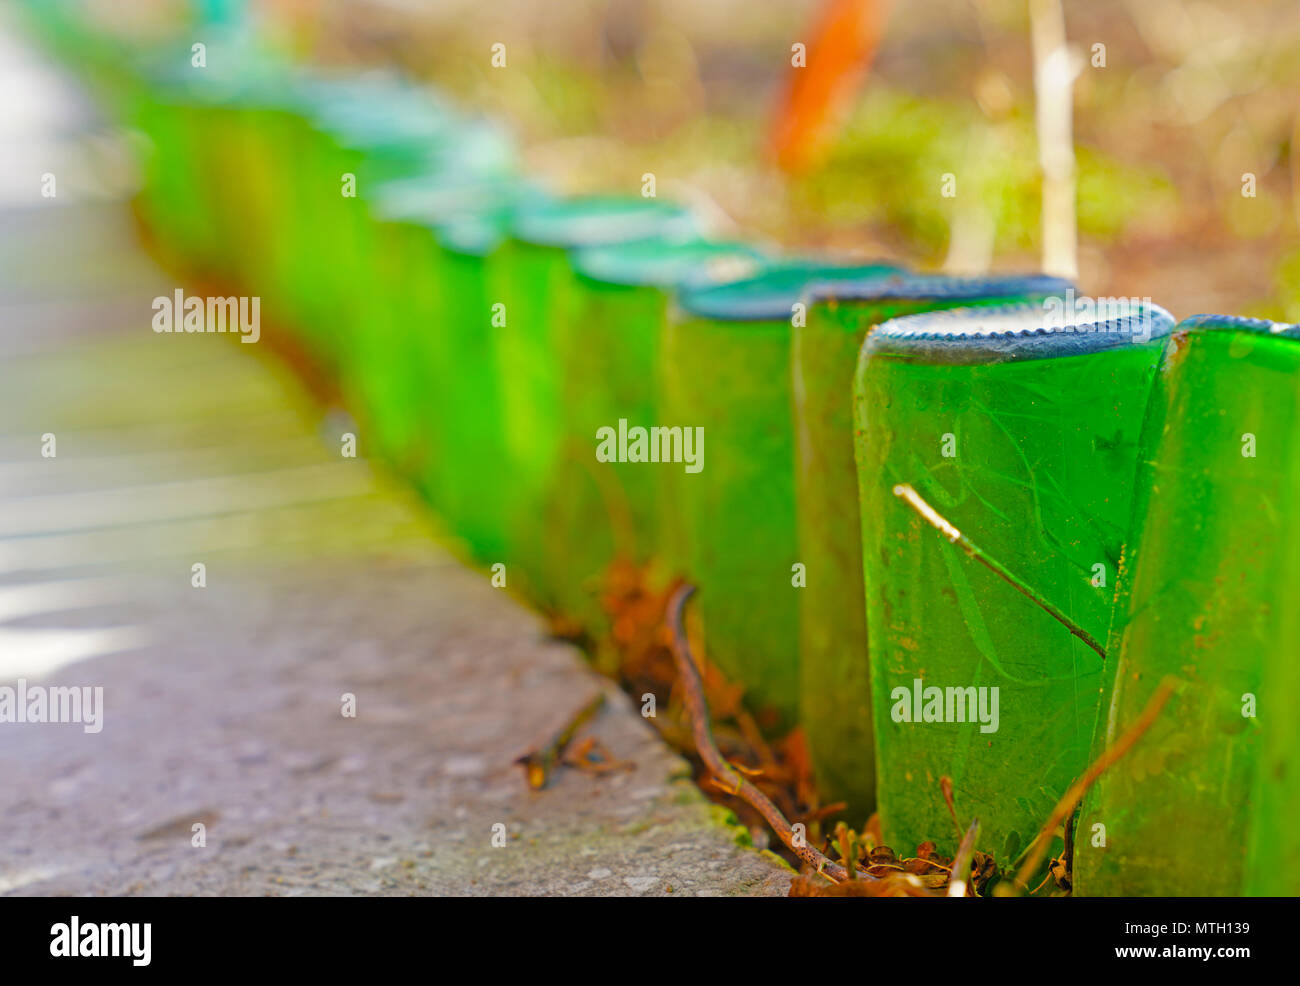 The border of the garden is made of non-returnable green glass bottles Stock Photo